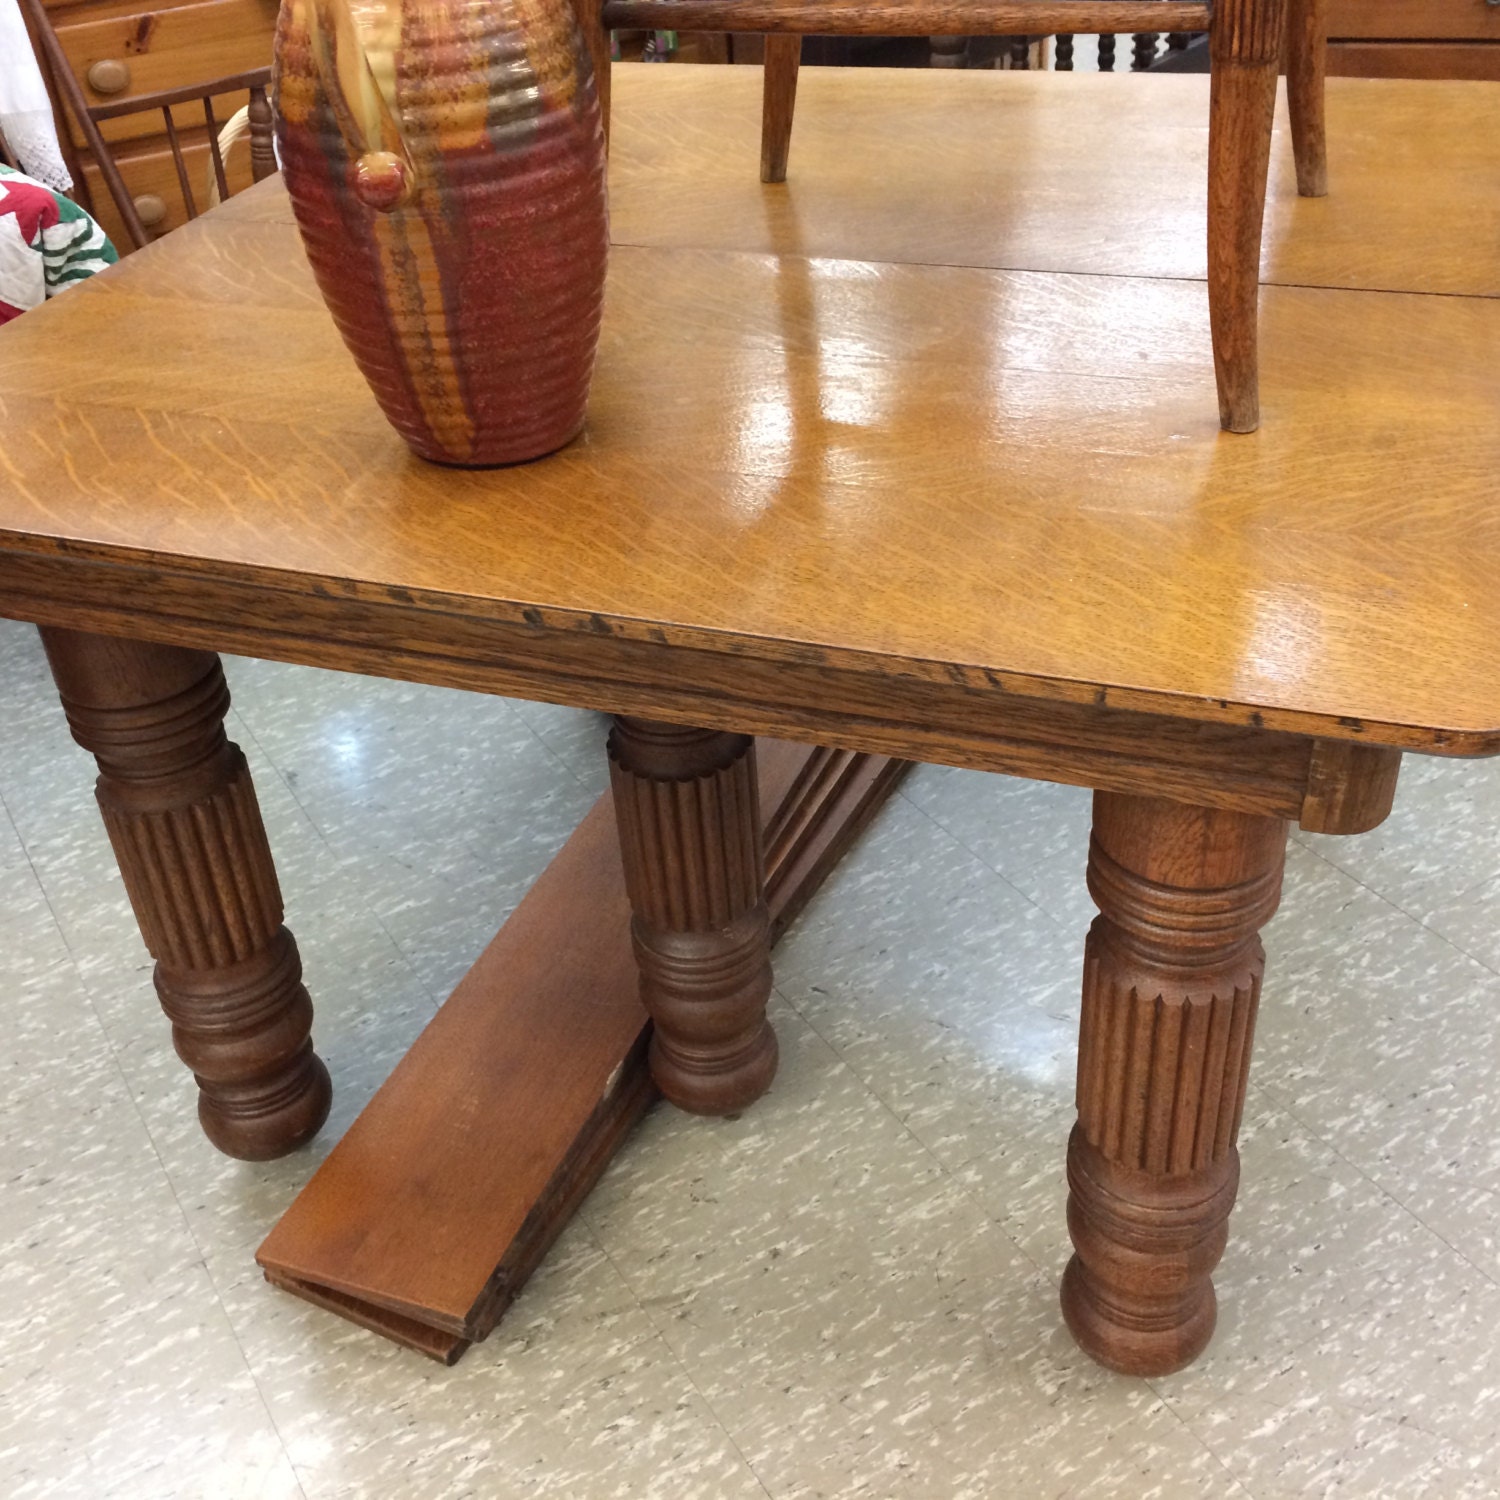 RESERVED FOR KIM Do not purchaseAntique Oak Table with Five